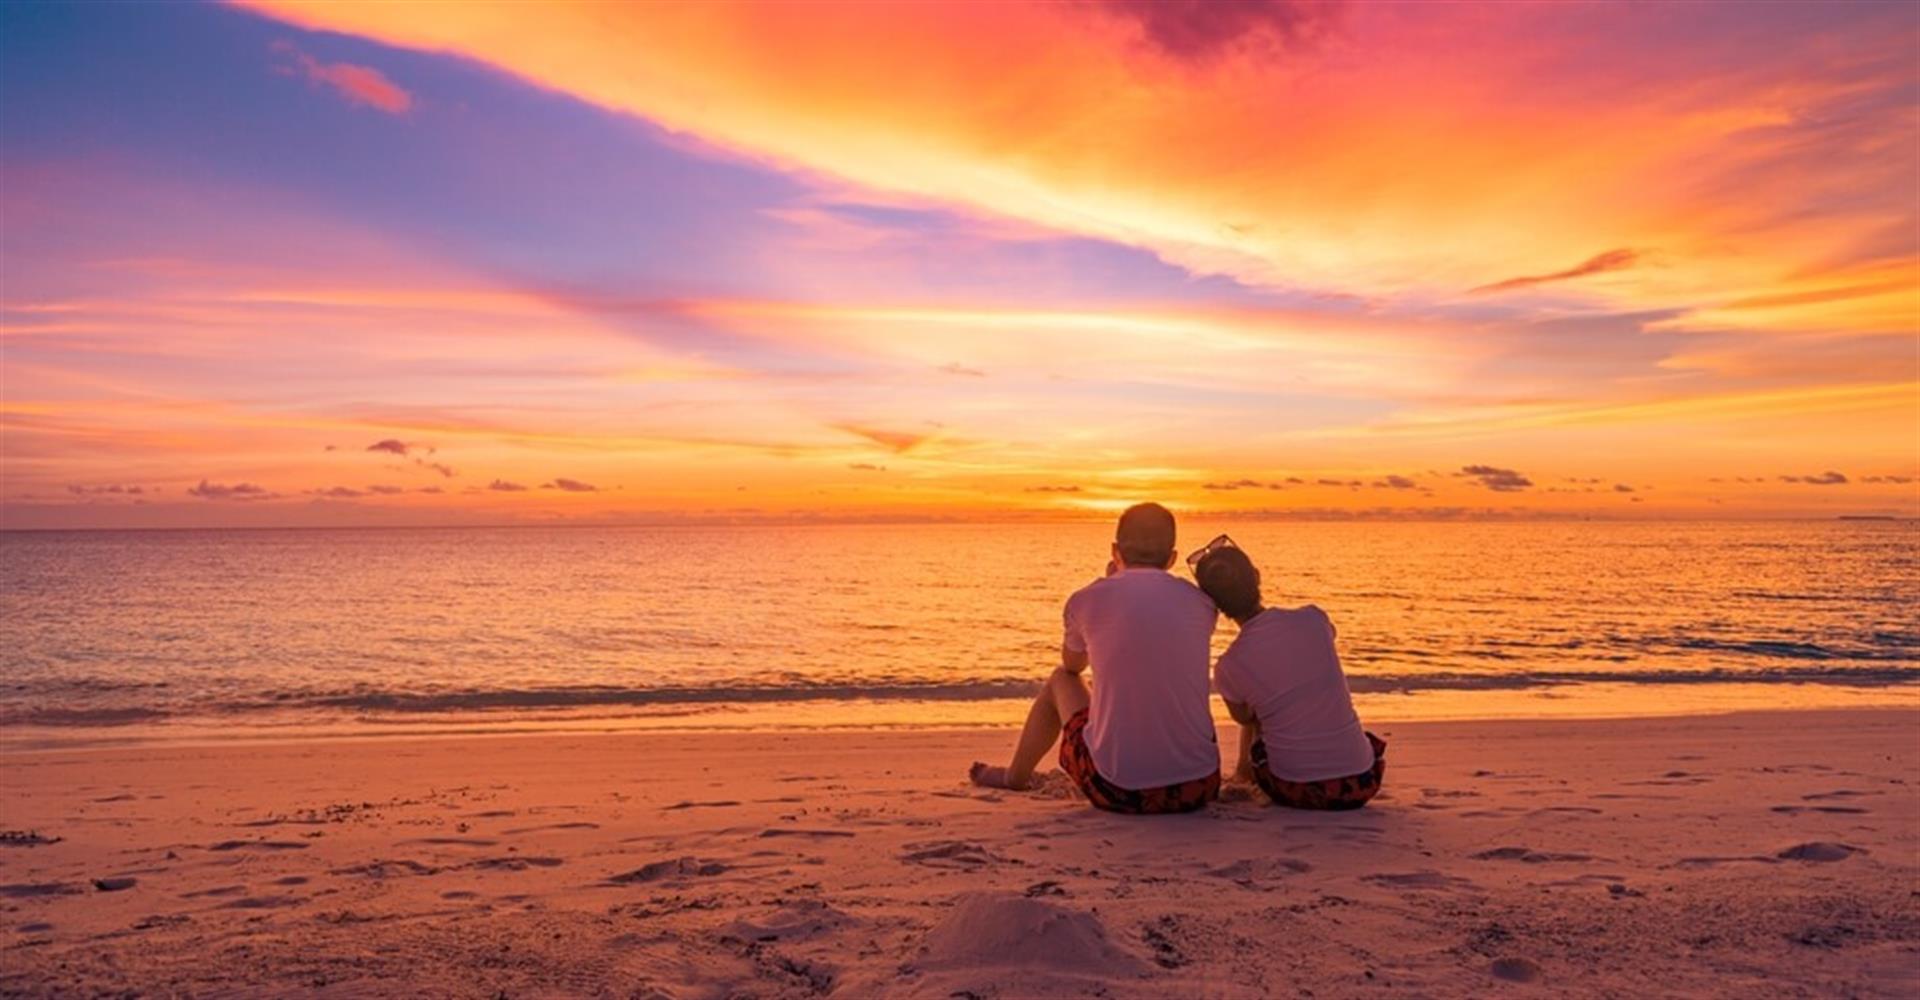 Two people sitting on the beach viewing a Destin sunset